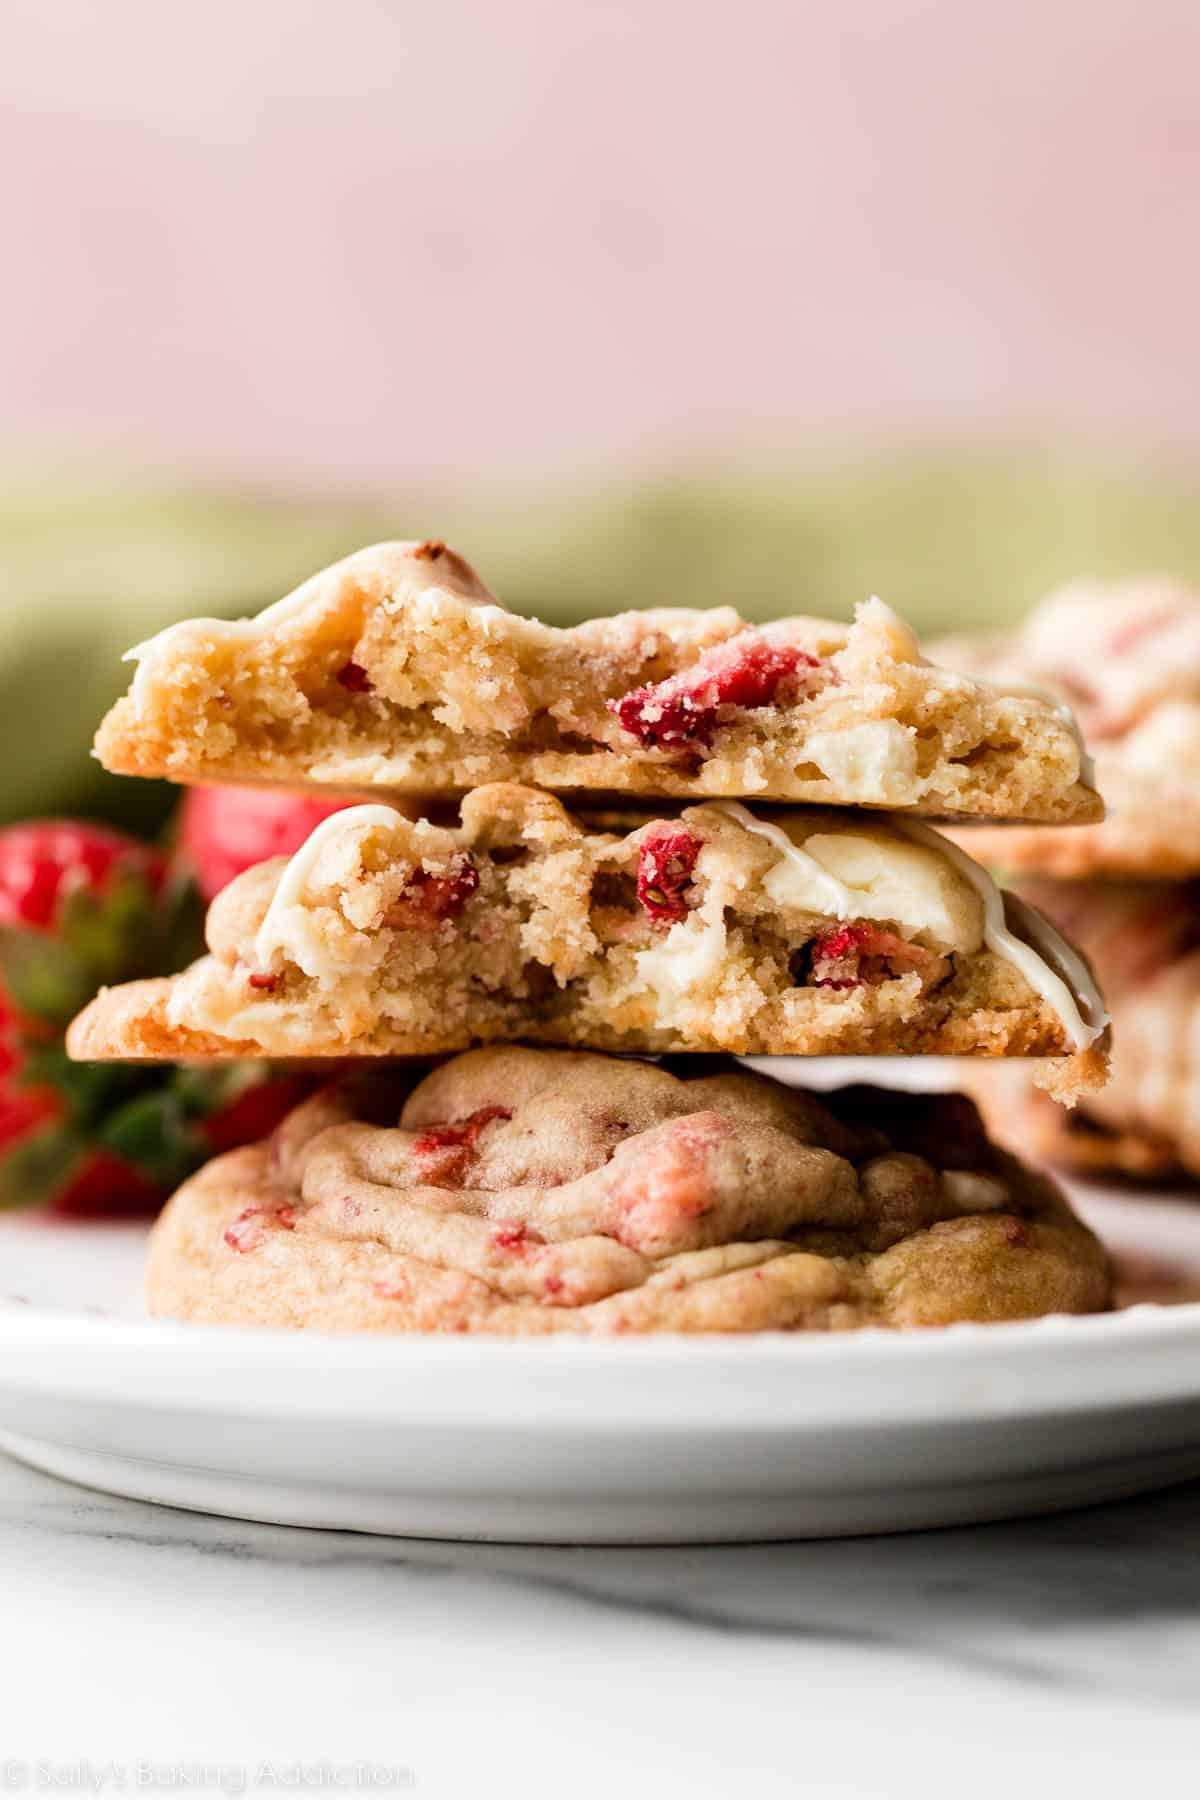 stack of white chocolate strawberries and cream cookies with top cookie broken in half.